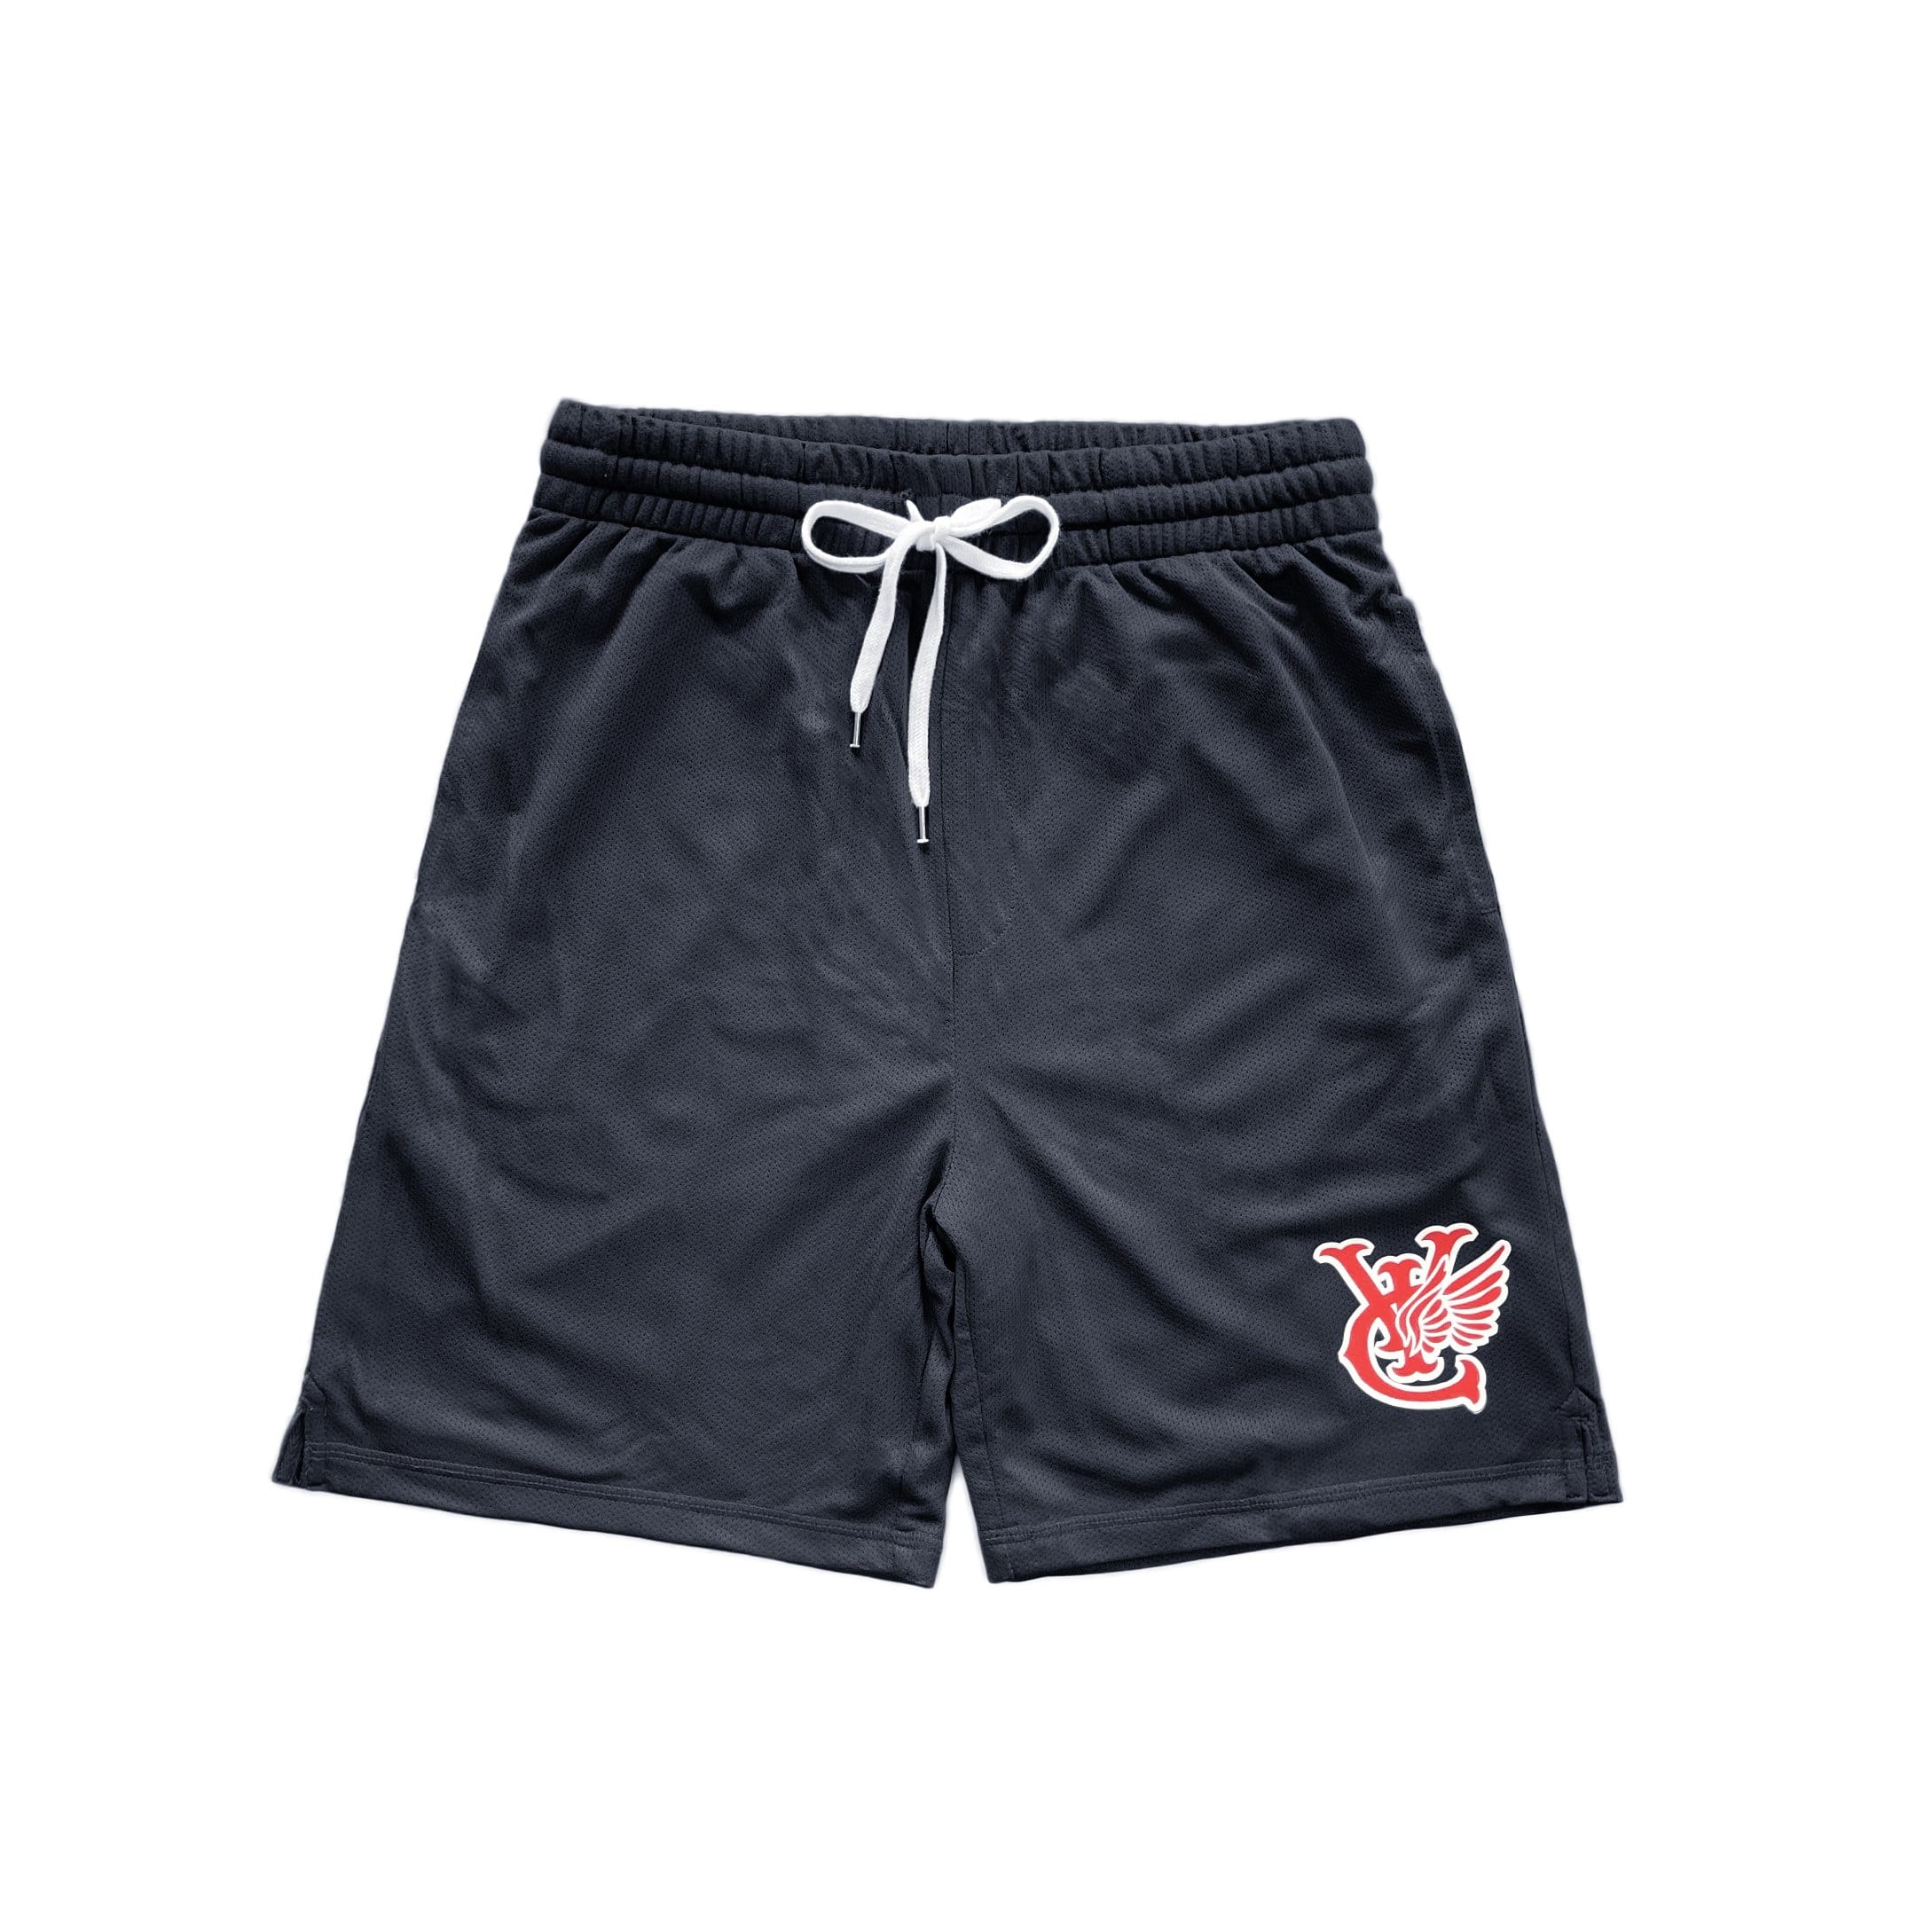 Retro style basketball shorts by New Zealand skate and streetwear clothing label VIC Apparel. American vintage classic sportswear. Full athletic fit. Minimal simple design.